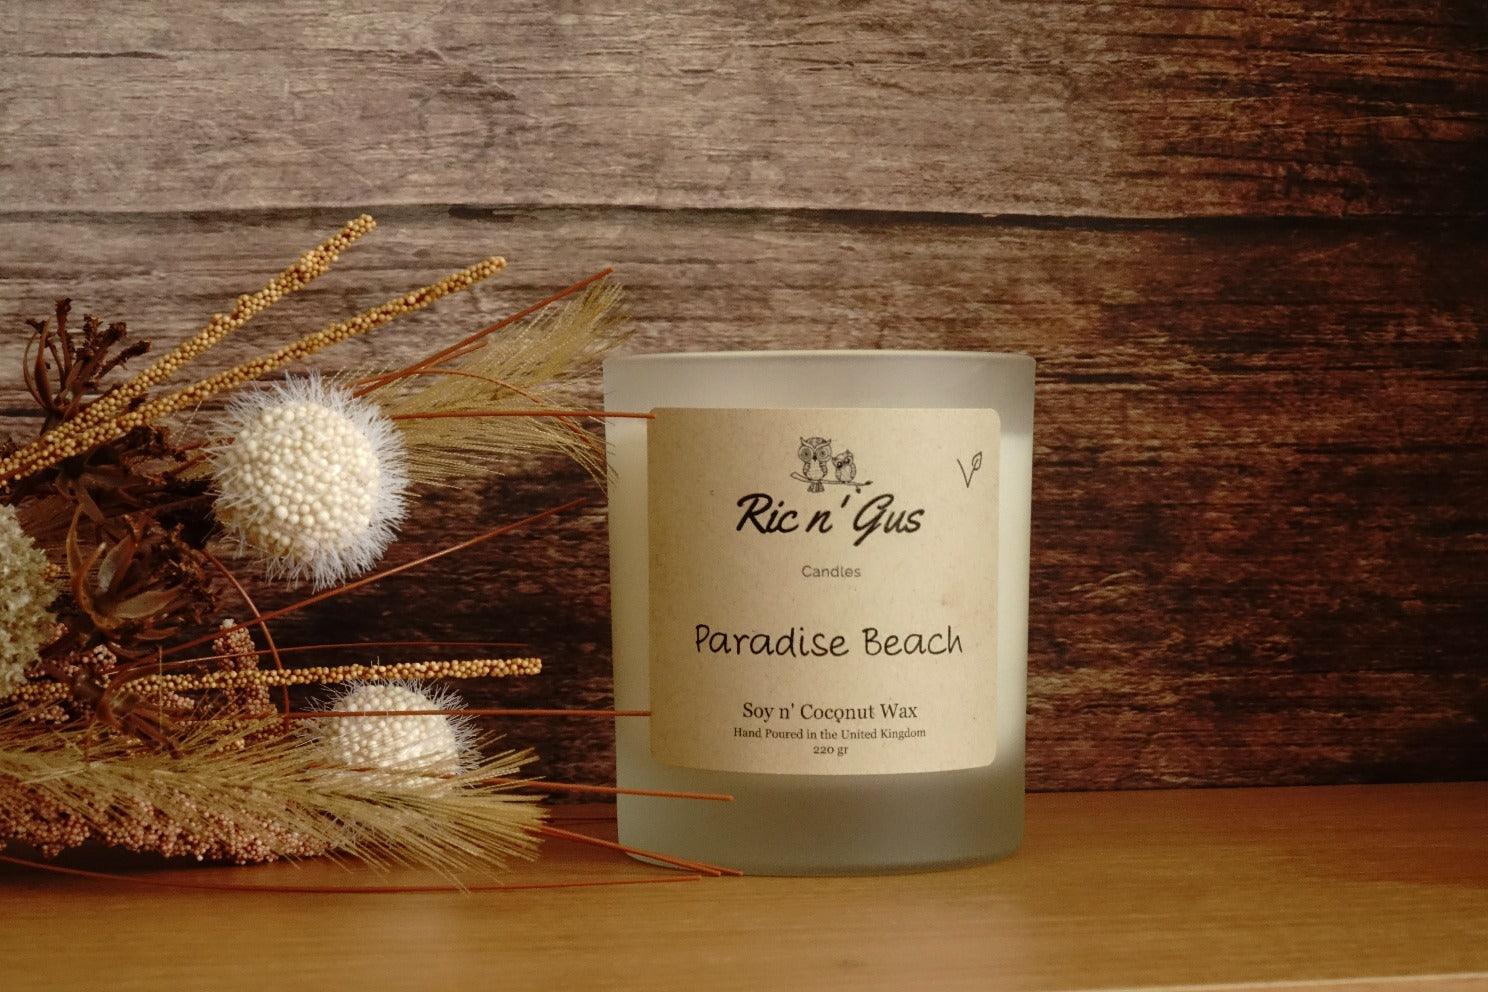 Paradise Beach Candle - Soy & Coconut Wax Ric n'Gus Candles